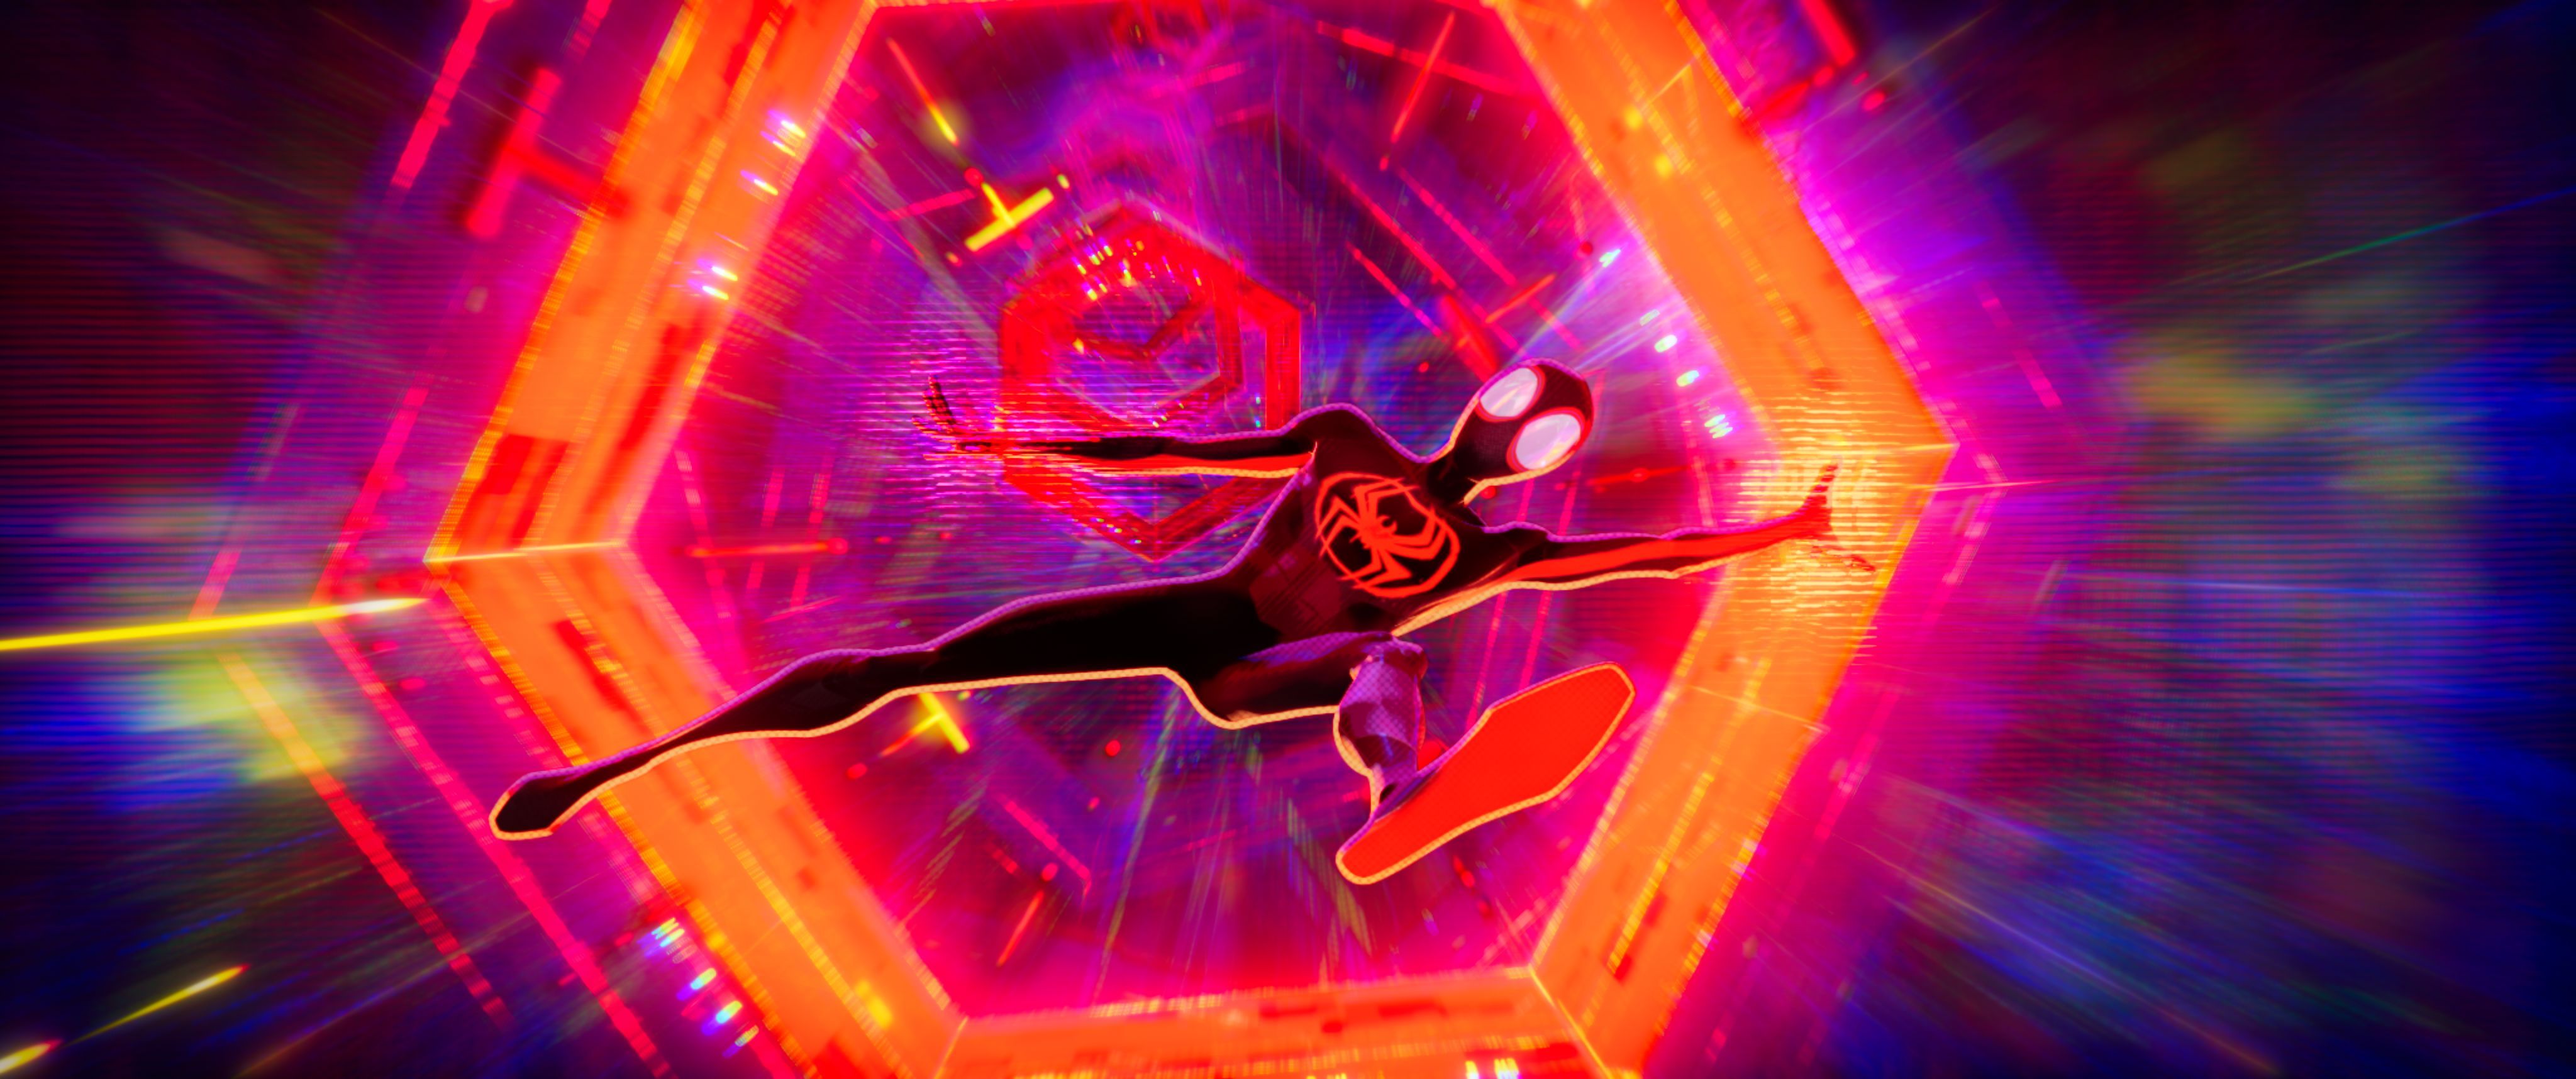 Spider-Man: Across the Spider-Verse' to release on this date in